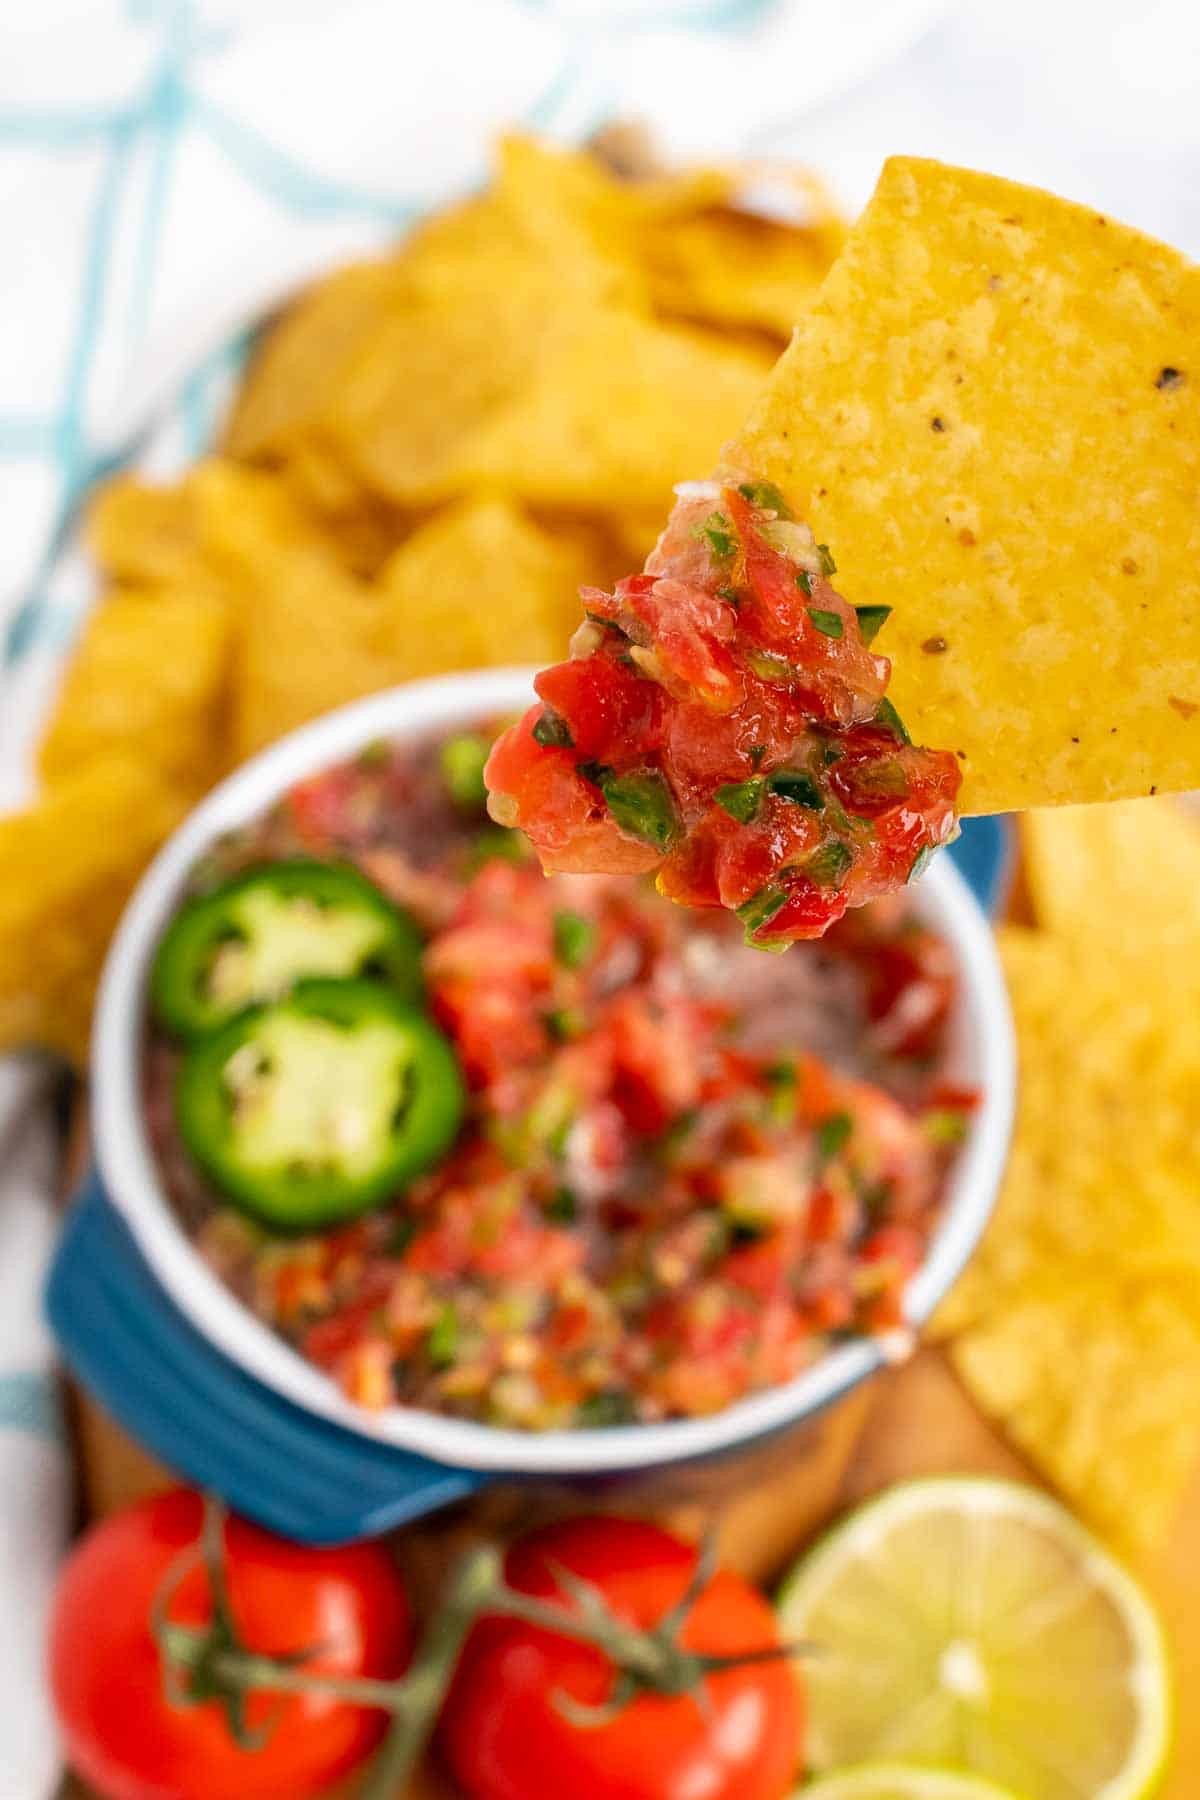 Chip with salsa over a bowl of salsa